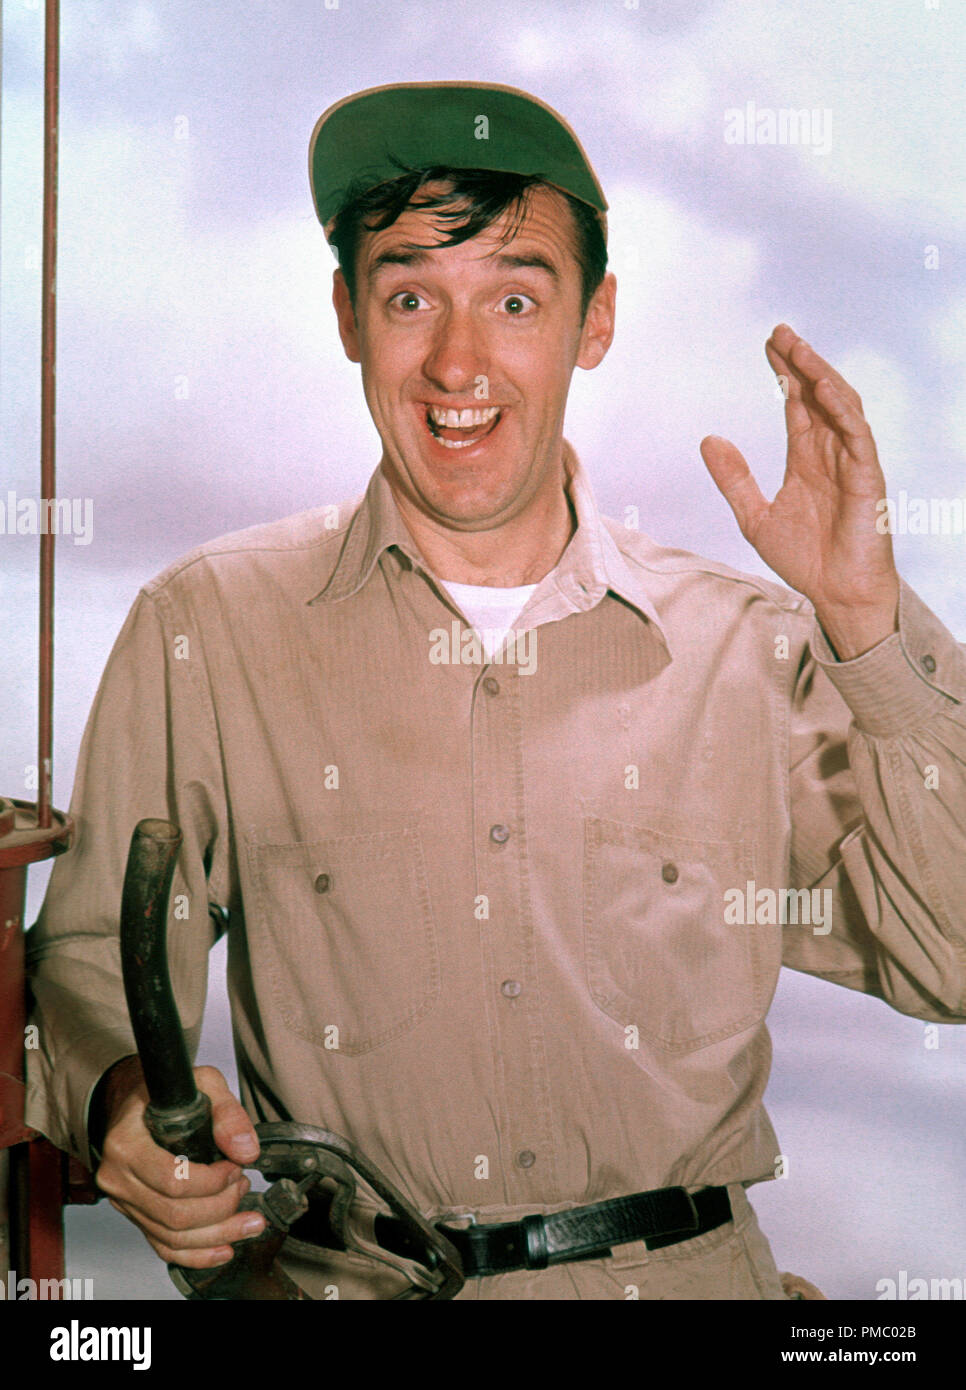 Jim Nabors, "The Andy Griffith Show" ca. 1962 CBS/Viacom Datei Referenz # 33480 353 THA Stockfoto